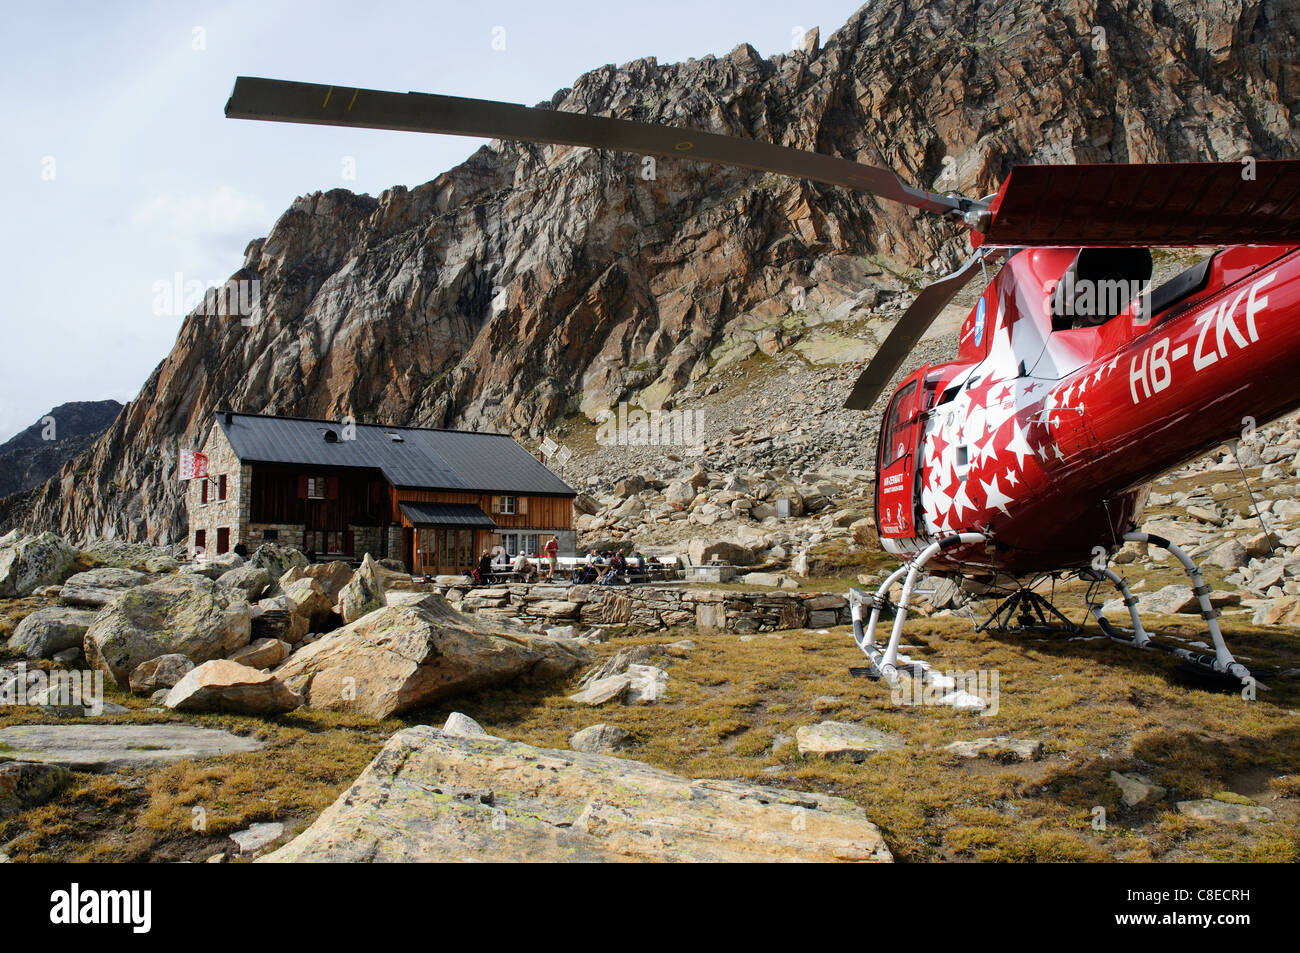 A rescue helicopter at the Almageller Hut  in the Swiss Alps Stock Photo